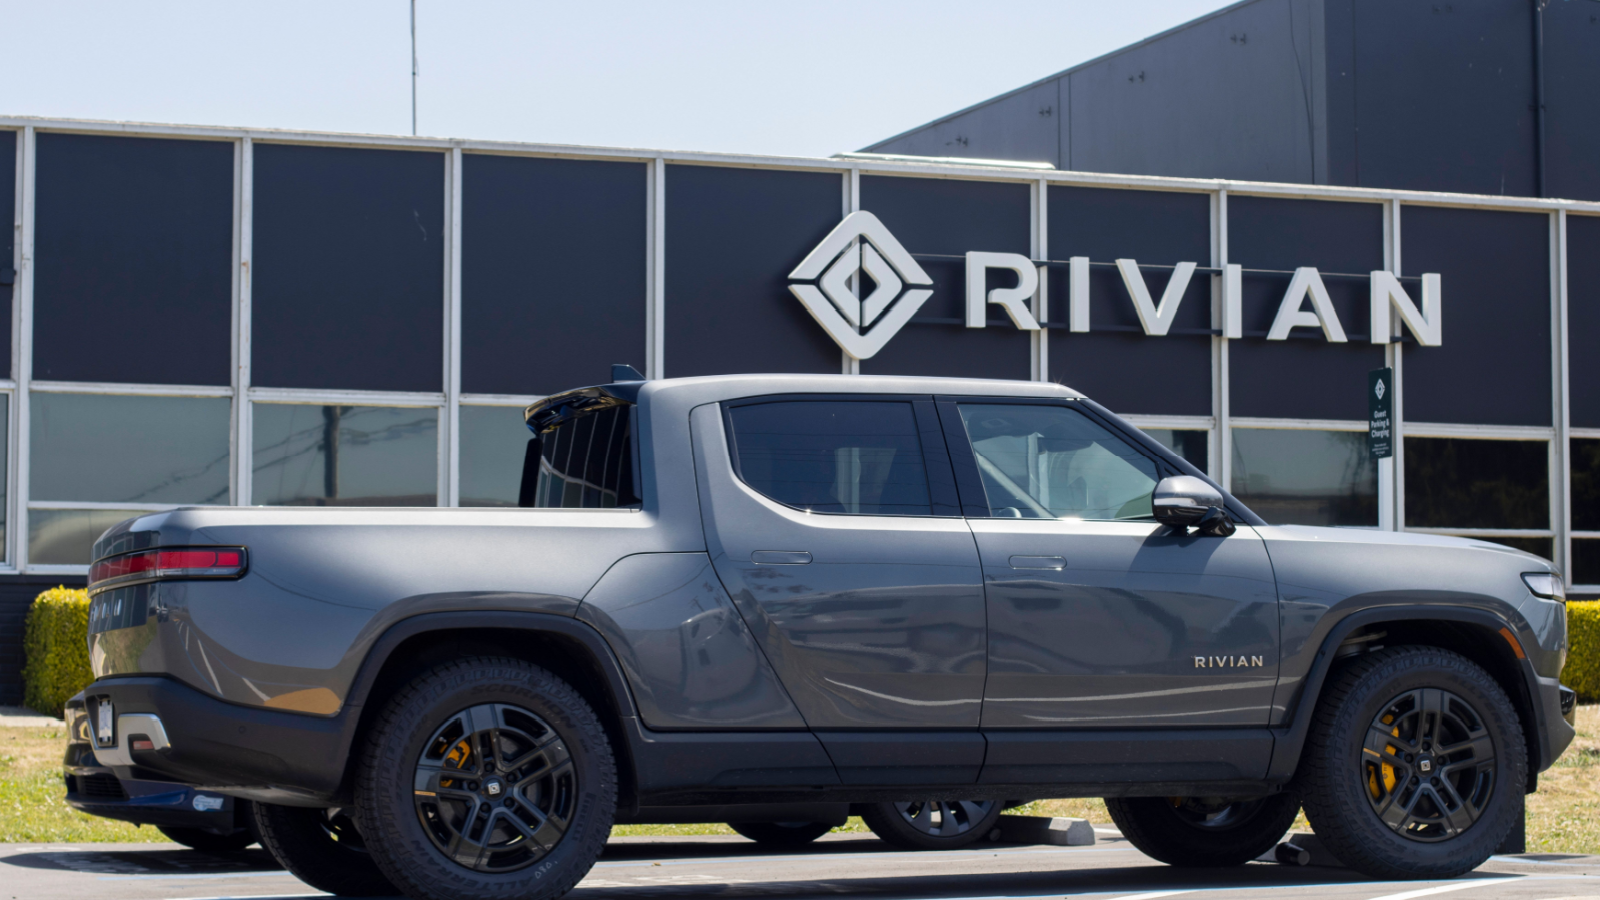 RIVN Stock: Rivian doubles down on plans to build a second electric vehicle factory